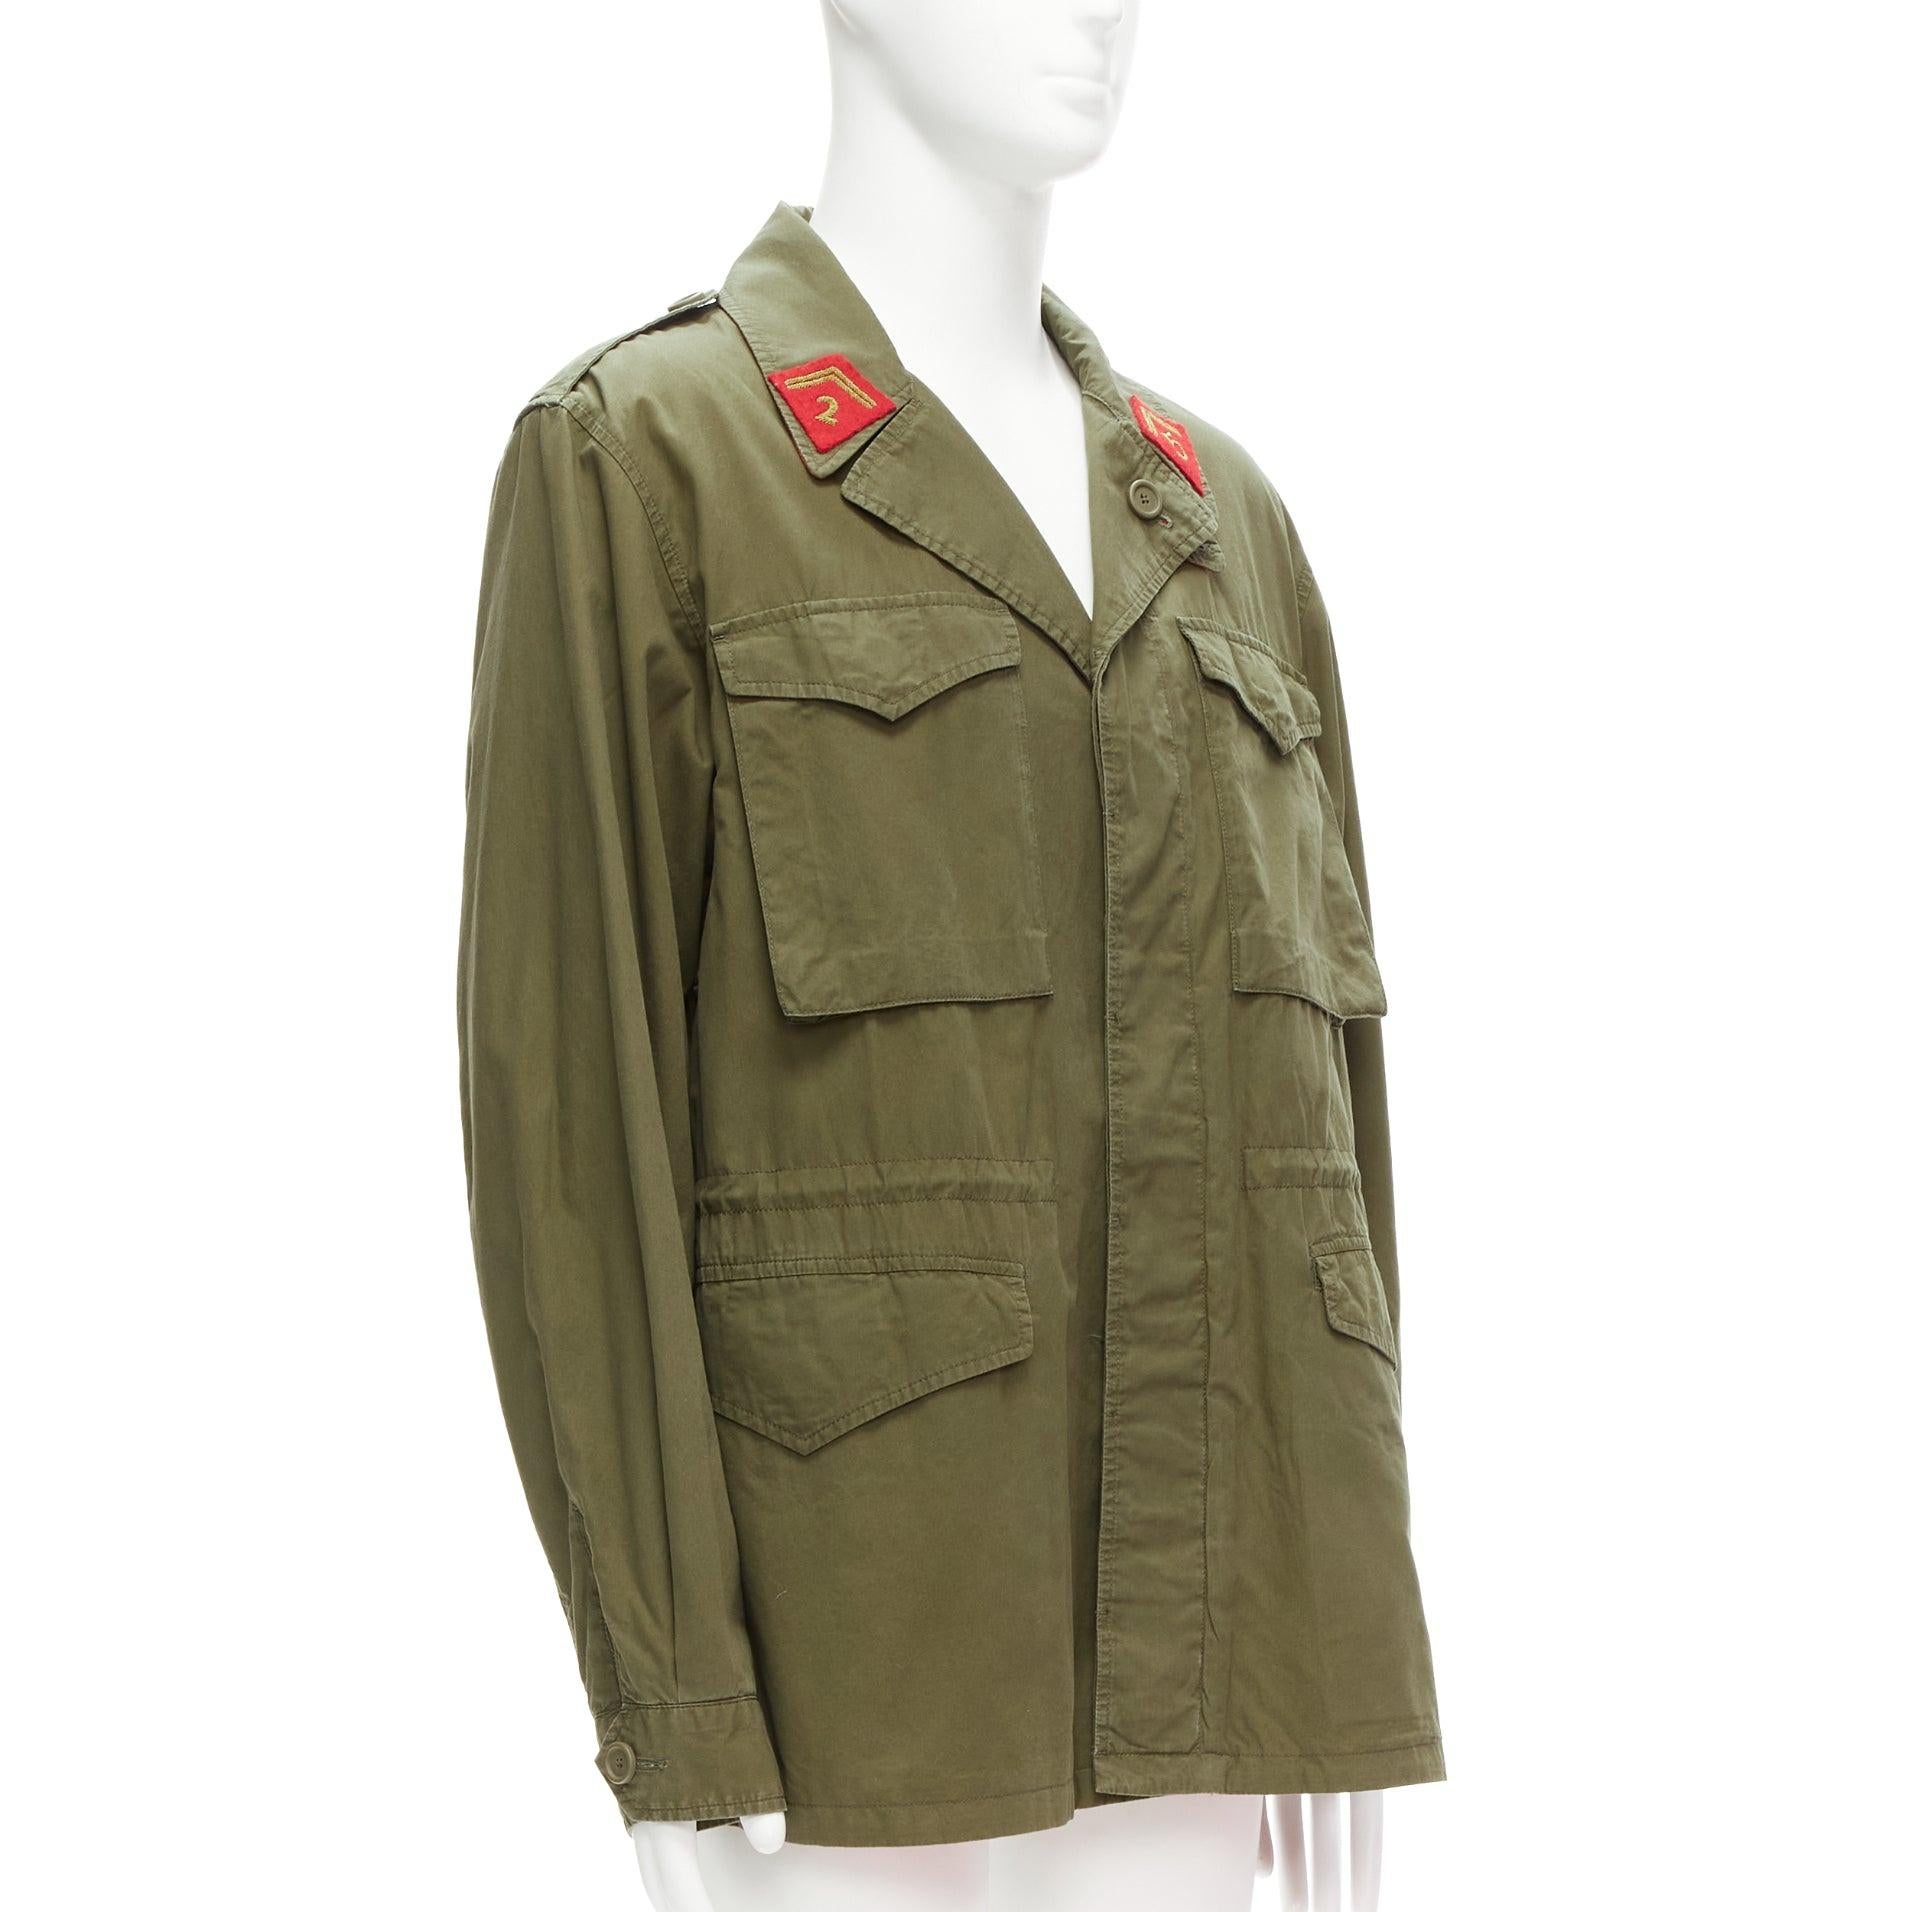 GUCCI Alessandro Michele Vintage Logo dragon embroidery green field jacket IT50 L
Reference: TGAS/D00851
Brand: Gucci
Designer: Alessandro Michele
Material: Cotton
Color: Khaki, Yellow
Pattern: Ethnic
Closure: Button
Lining: Red Fabric
Extra